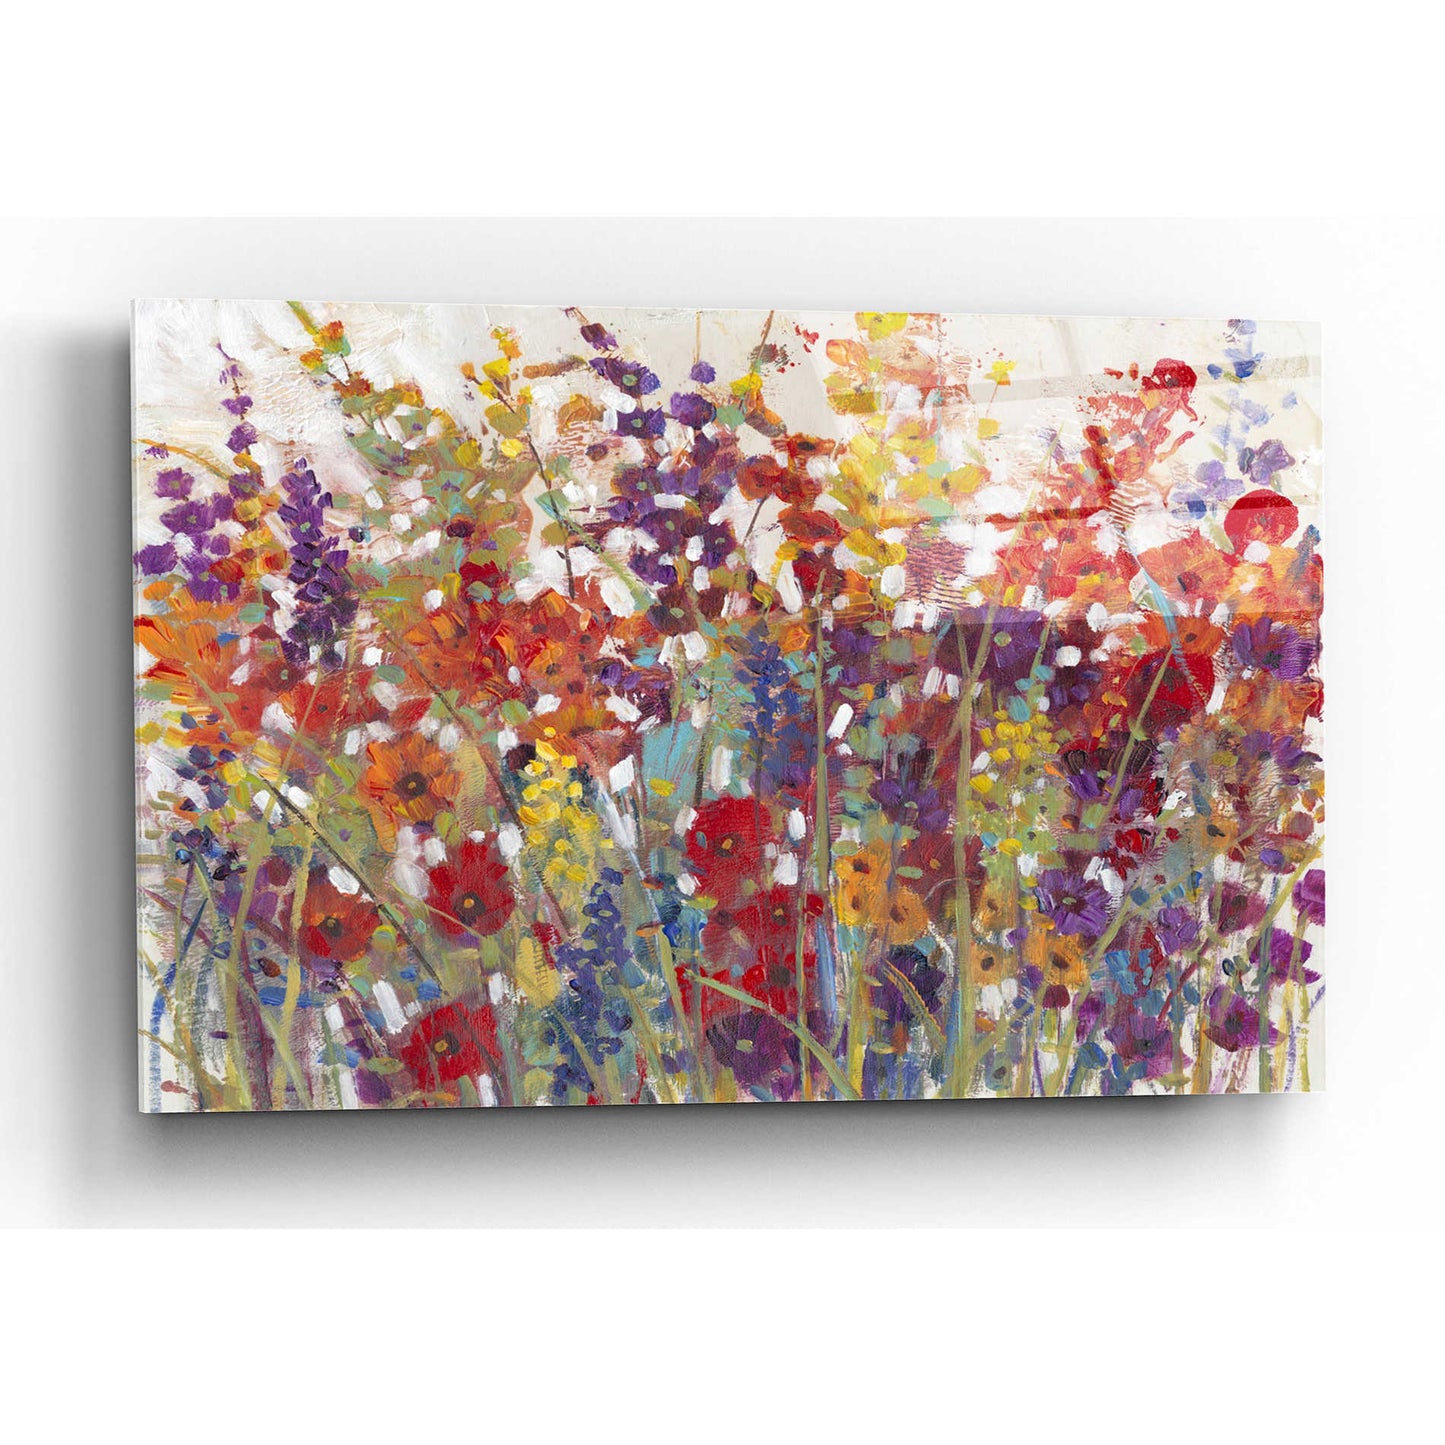 Epic Art 'Variety of Flowers II' by Tim O'Toole, Acrylic Glass Wall Art,24x16